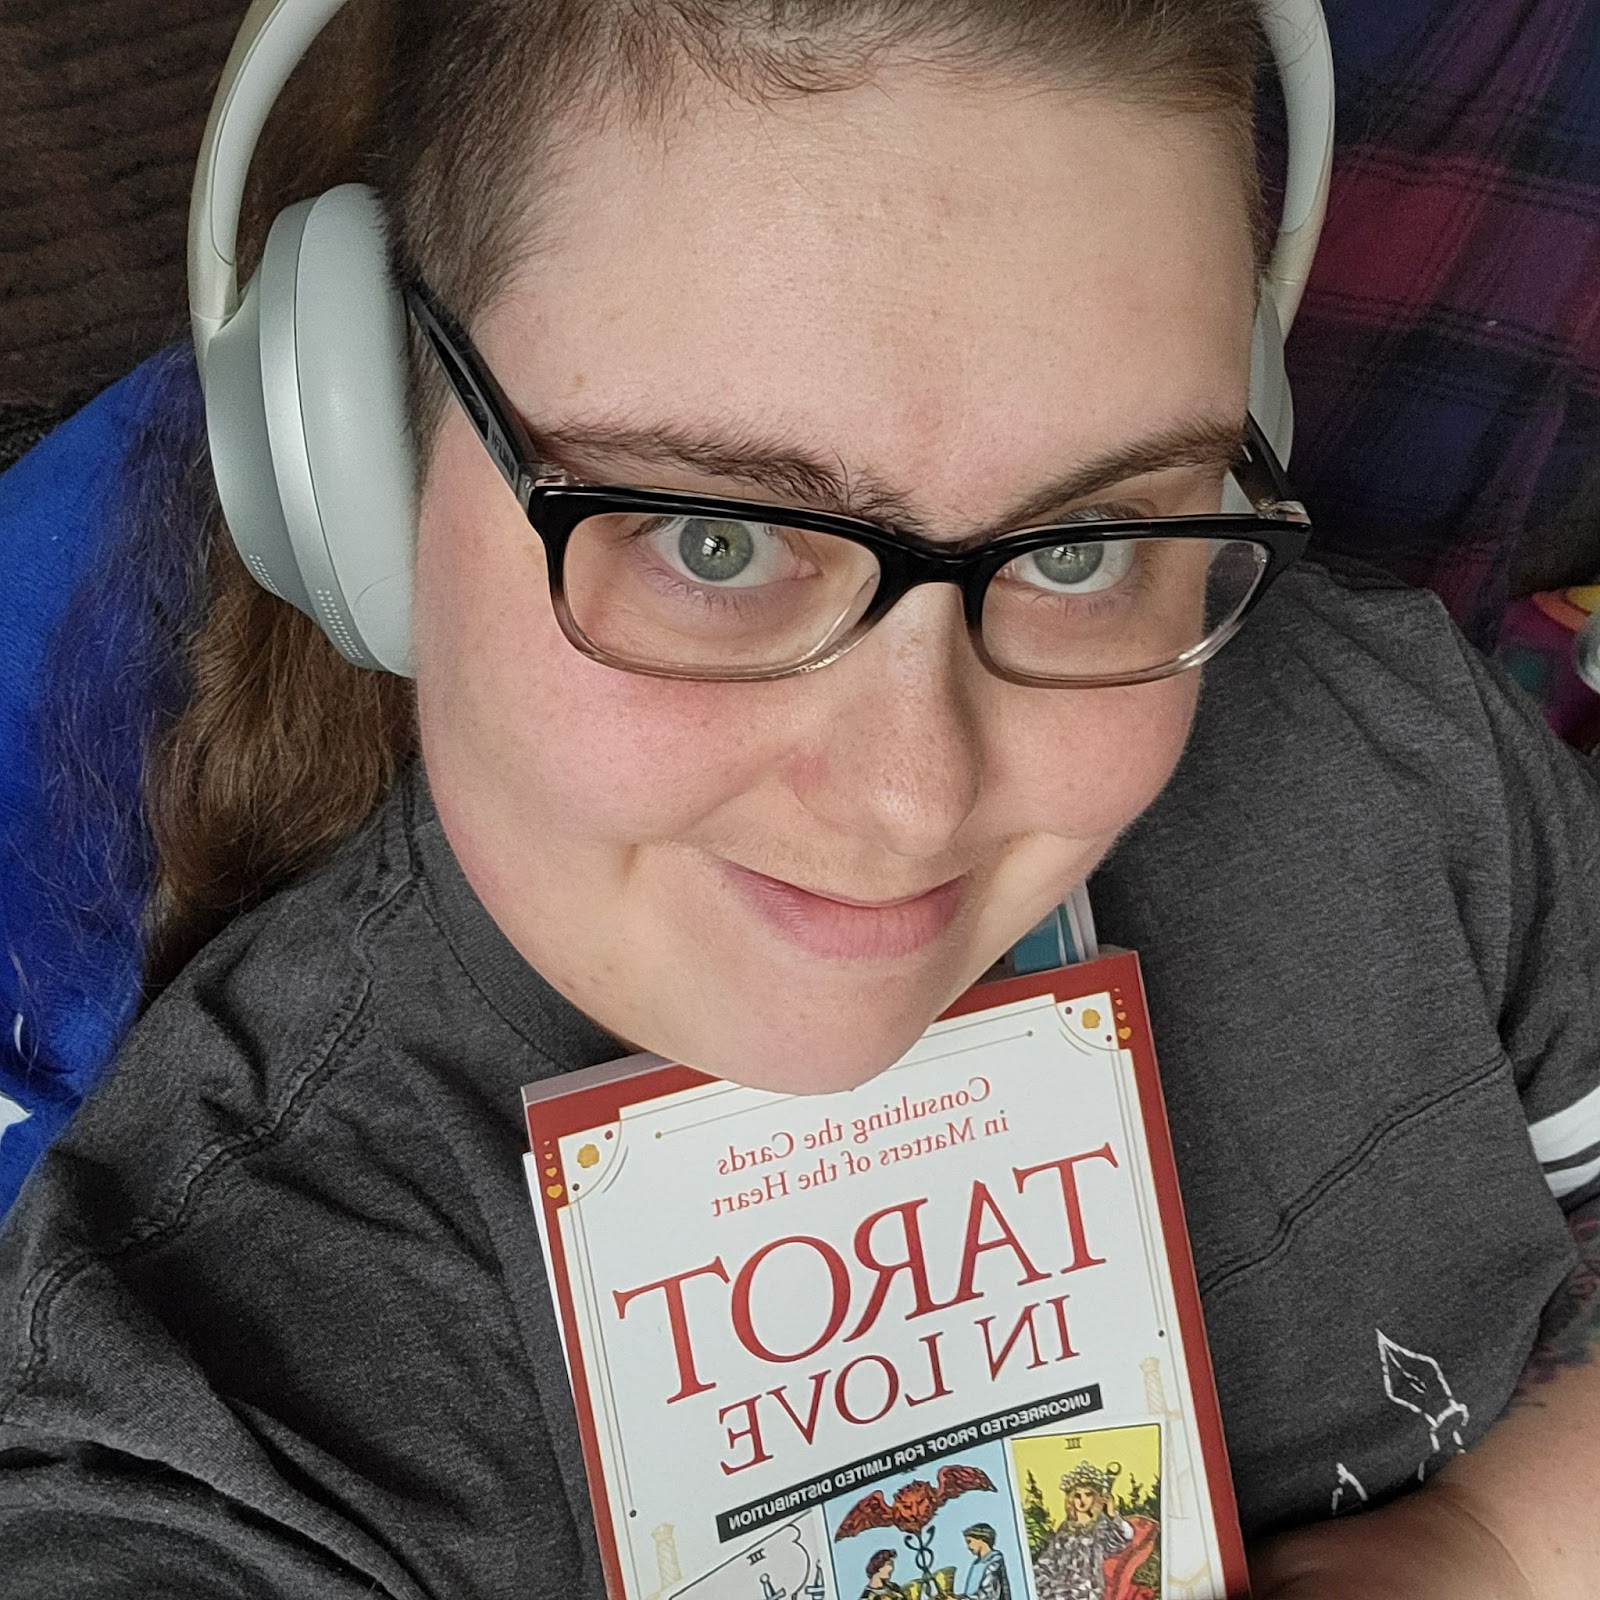 Image description: Ru-Lee Story, a nonbinary person with blue-green eyes and spectacles, smiles at the camera while holding an advanced reader copy of Tarot in Love by Elliot Adam.